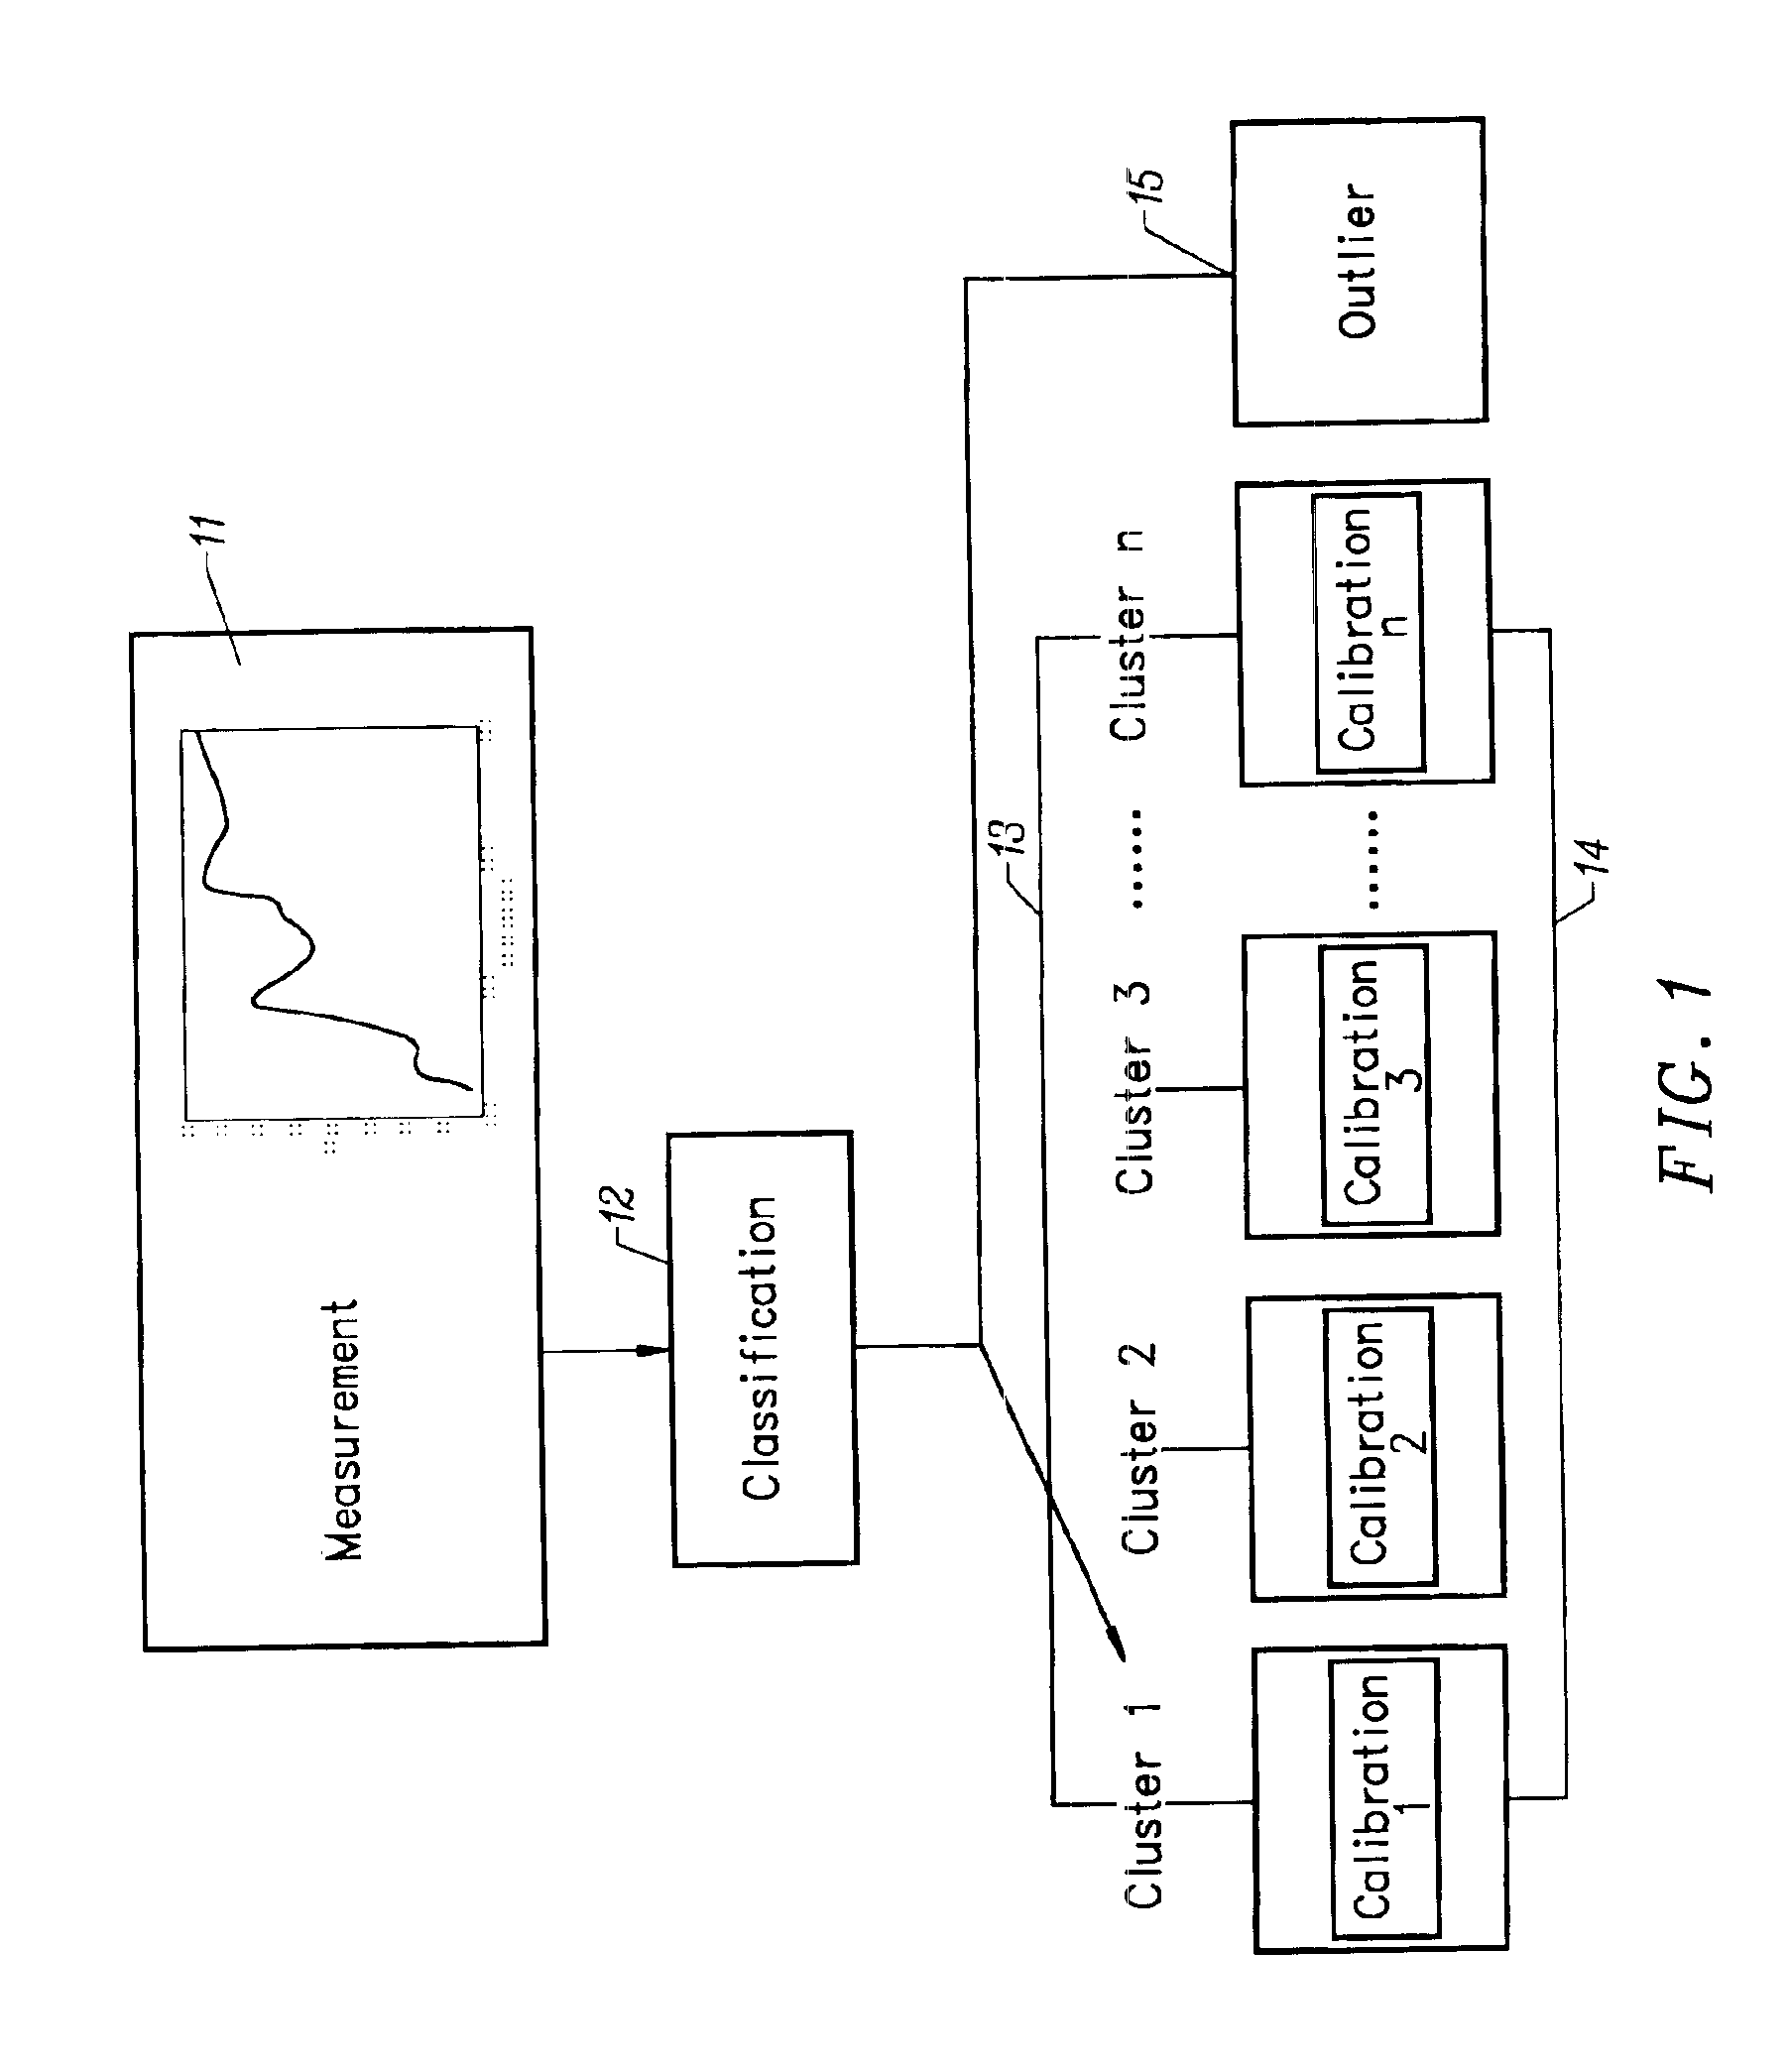 Method of characterizing spectrometer instruments and providing calibration models to compensate for instrument variation